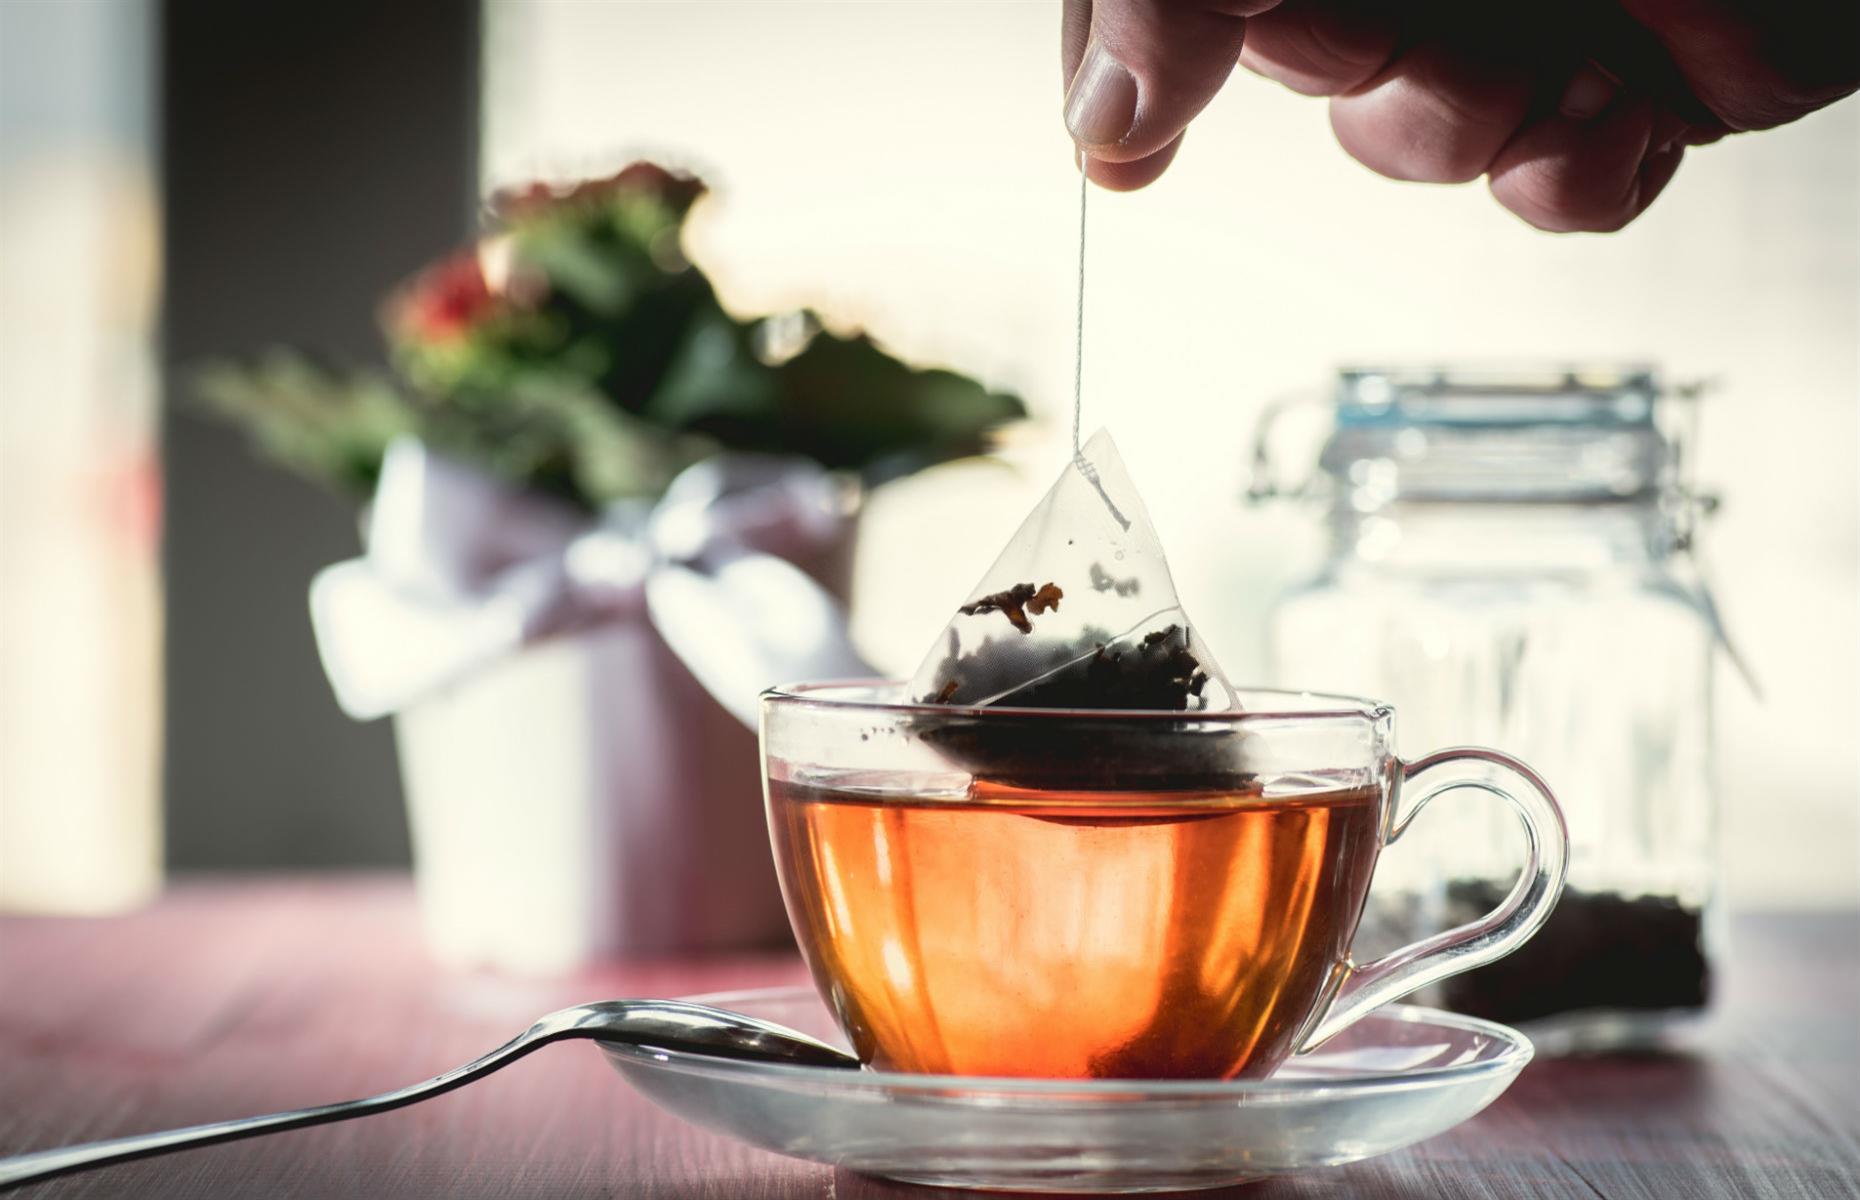 <p>Unless it’s expressly part of the minibar, tea bags and coffee provided are generally free to take. Be wary when it comes to pricier items such as Nespresso and other coffee pods, though, as these may not be included.</p>